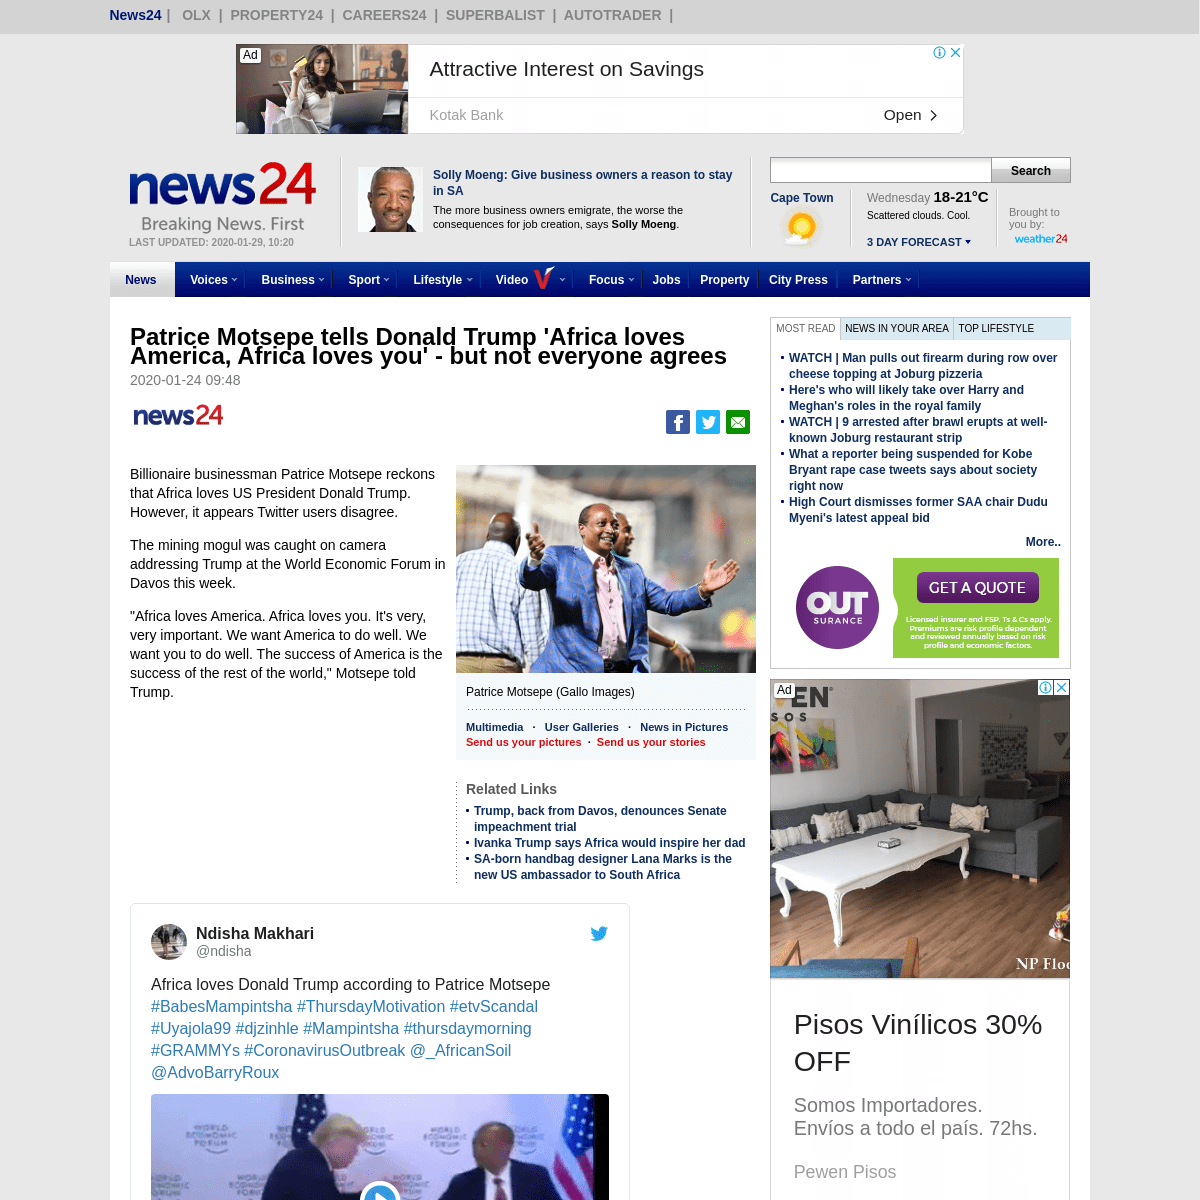 A complete backup of www.news24.com/SouthAfrica/News/in-tweets-motsepe-tells-trump-africa-loves-america-but-not-everyone-agrees-